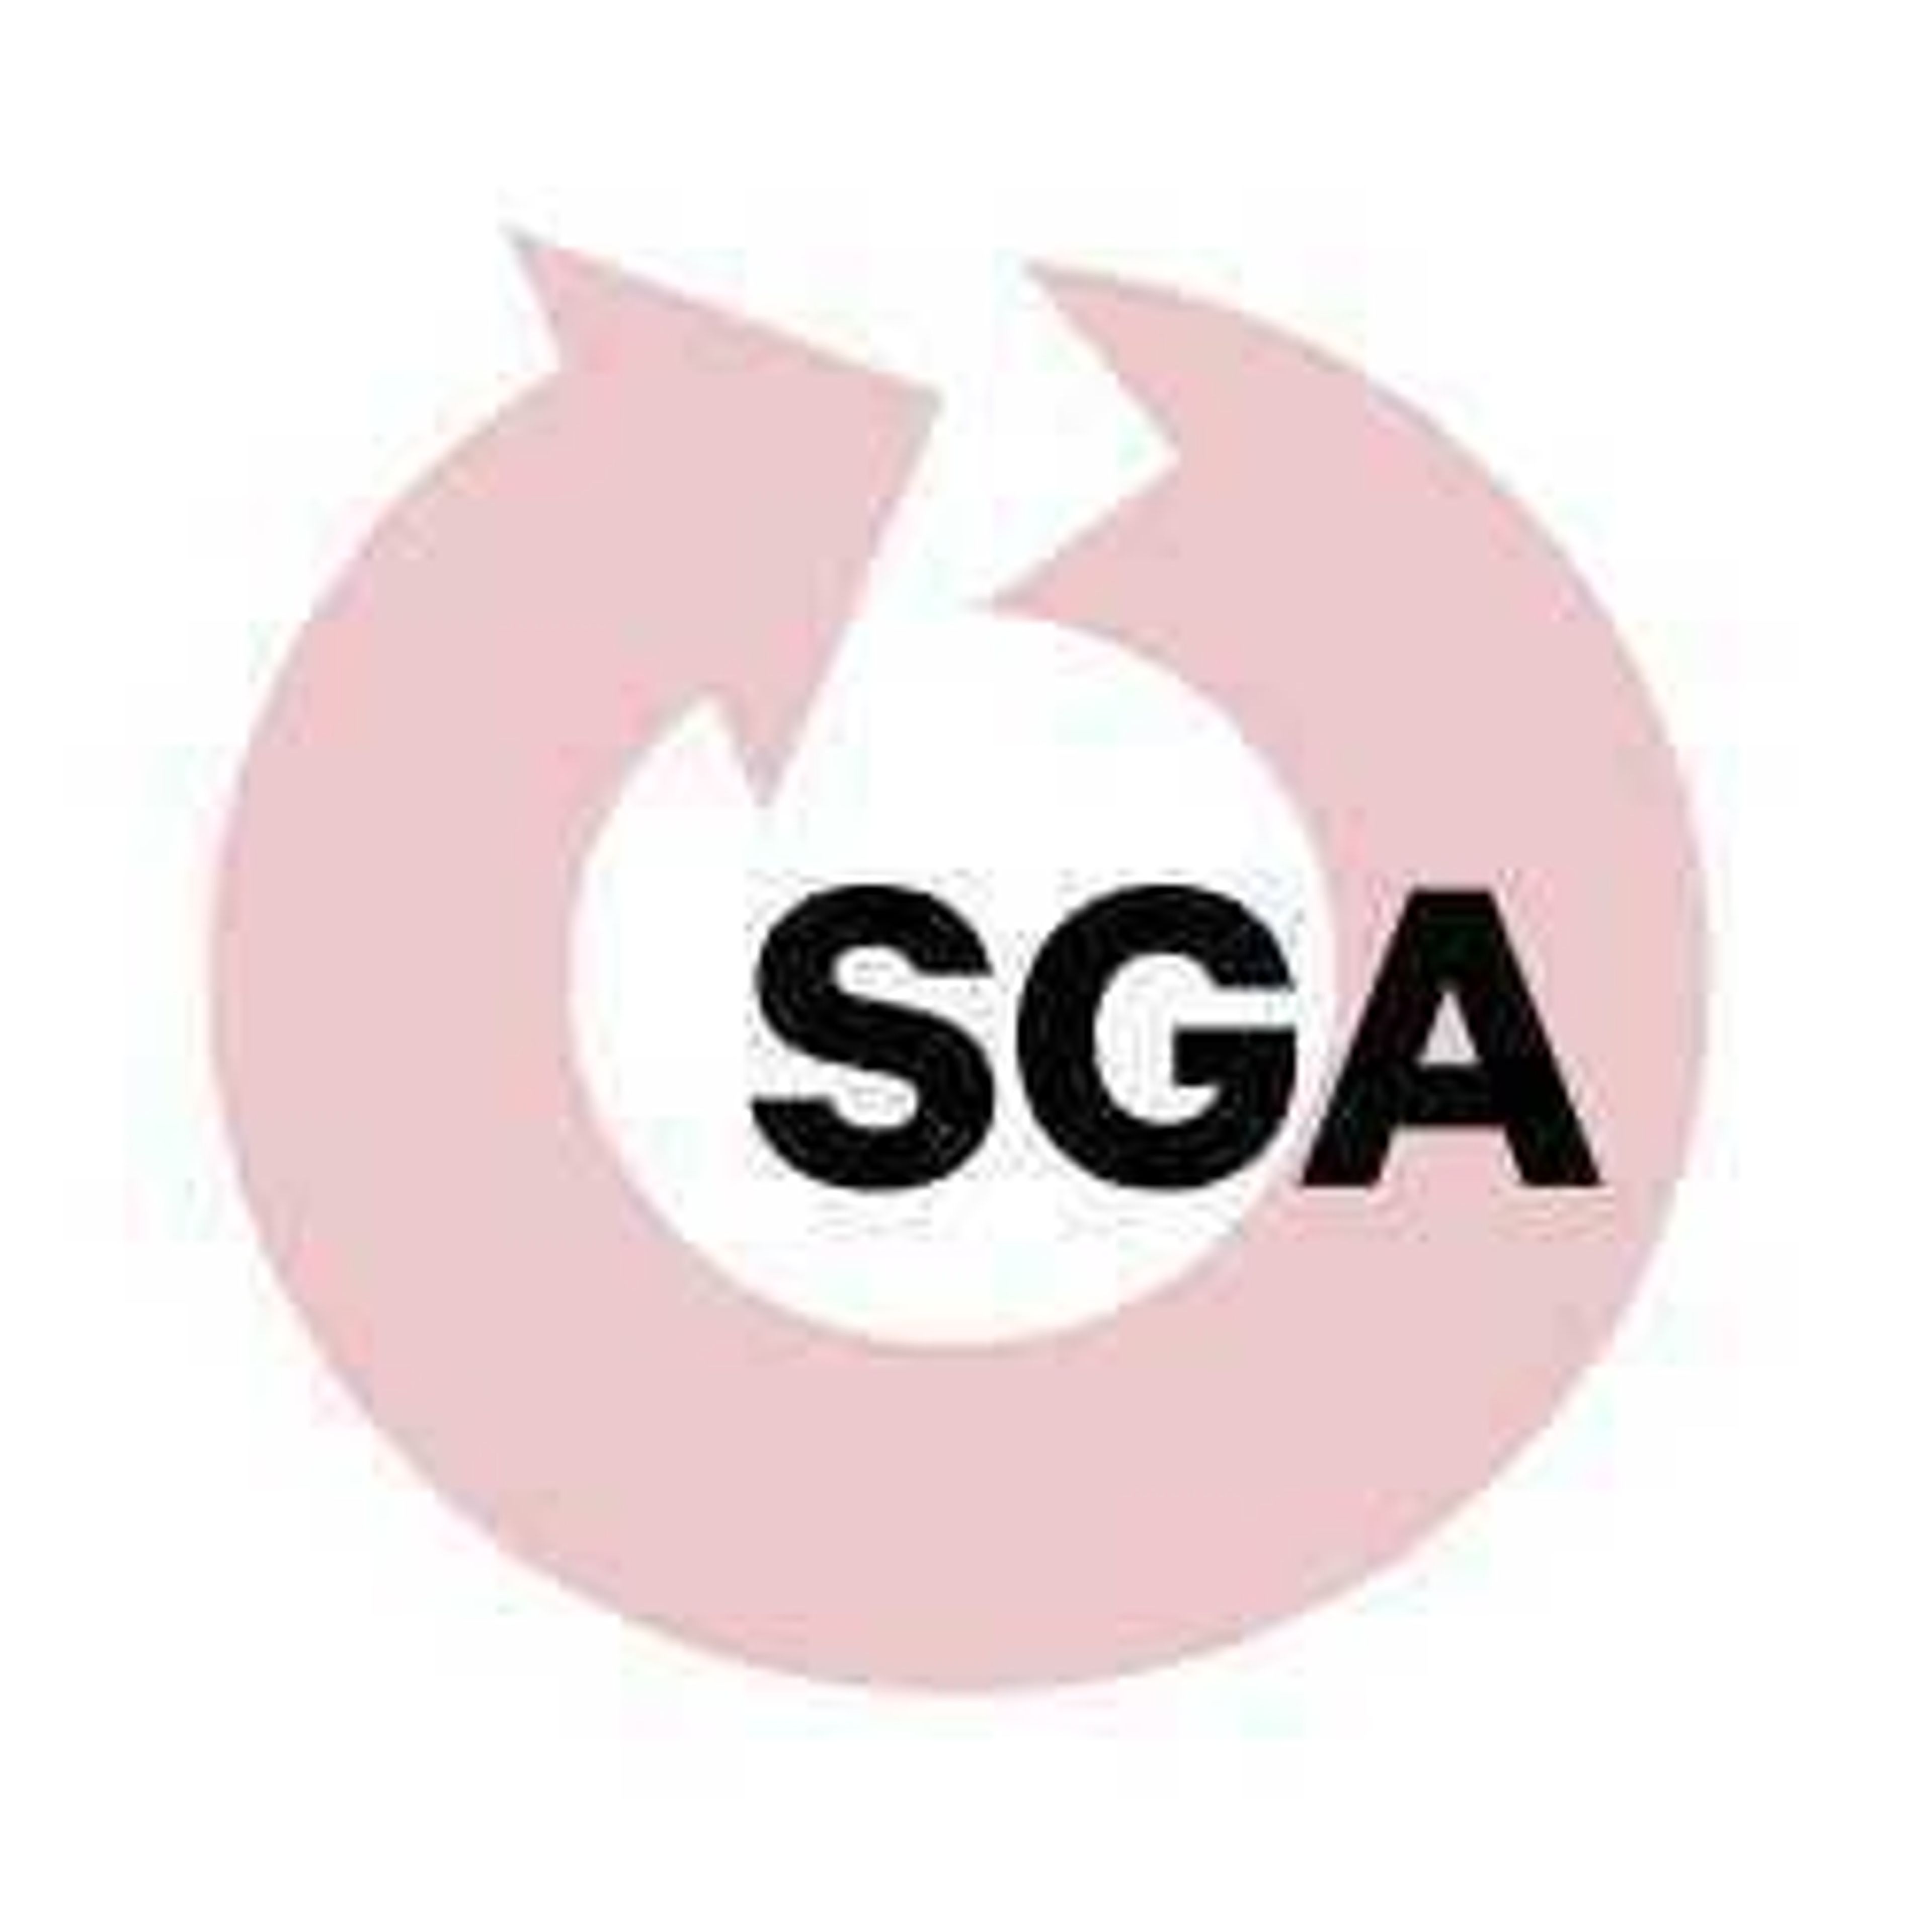 Tuition increase proposed; SGA finalizes budgets and funding for upcoming semester